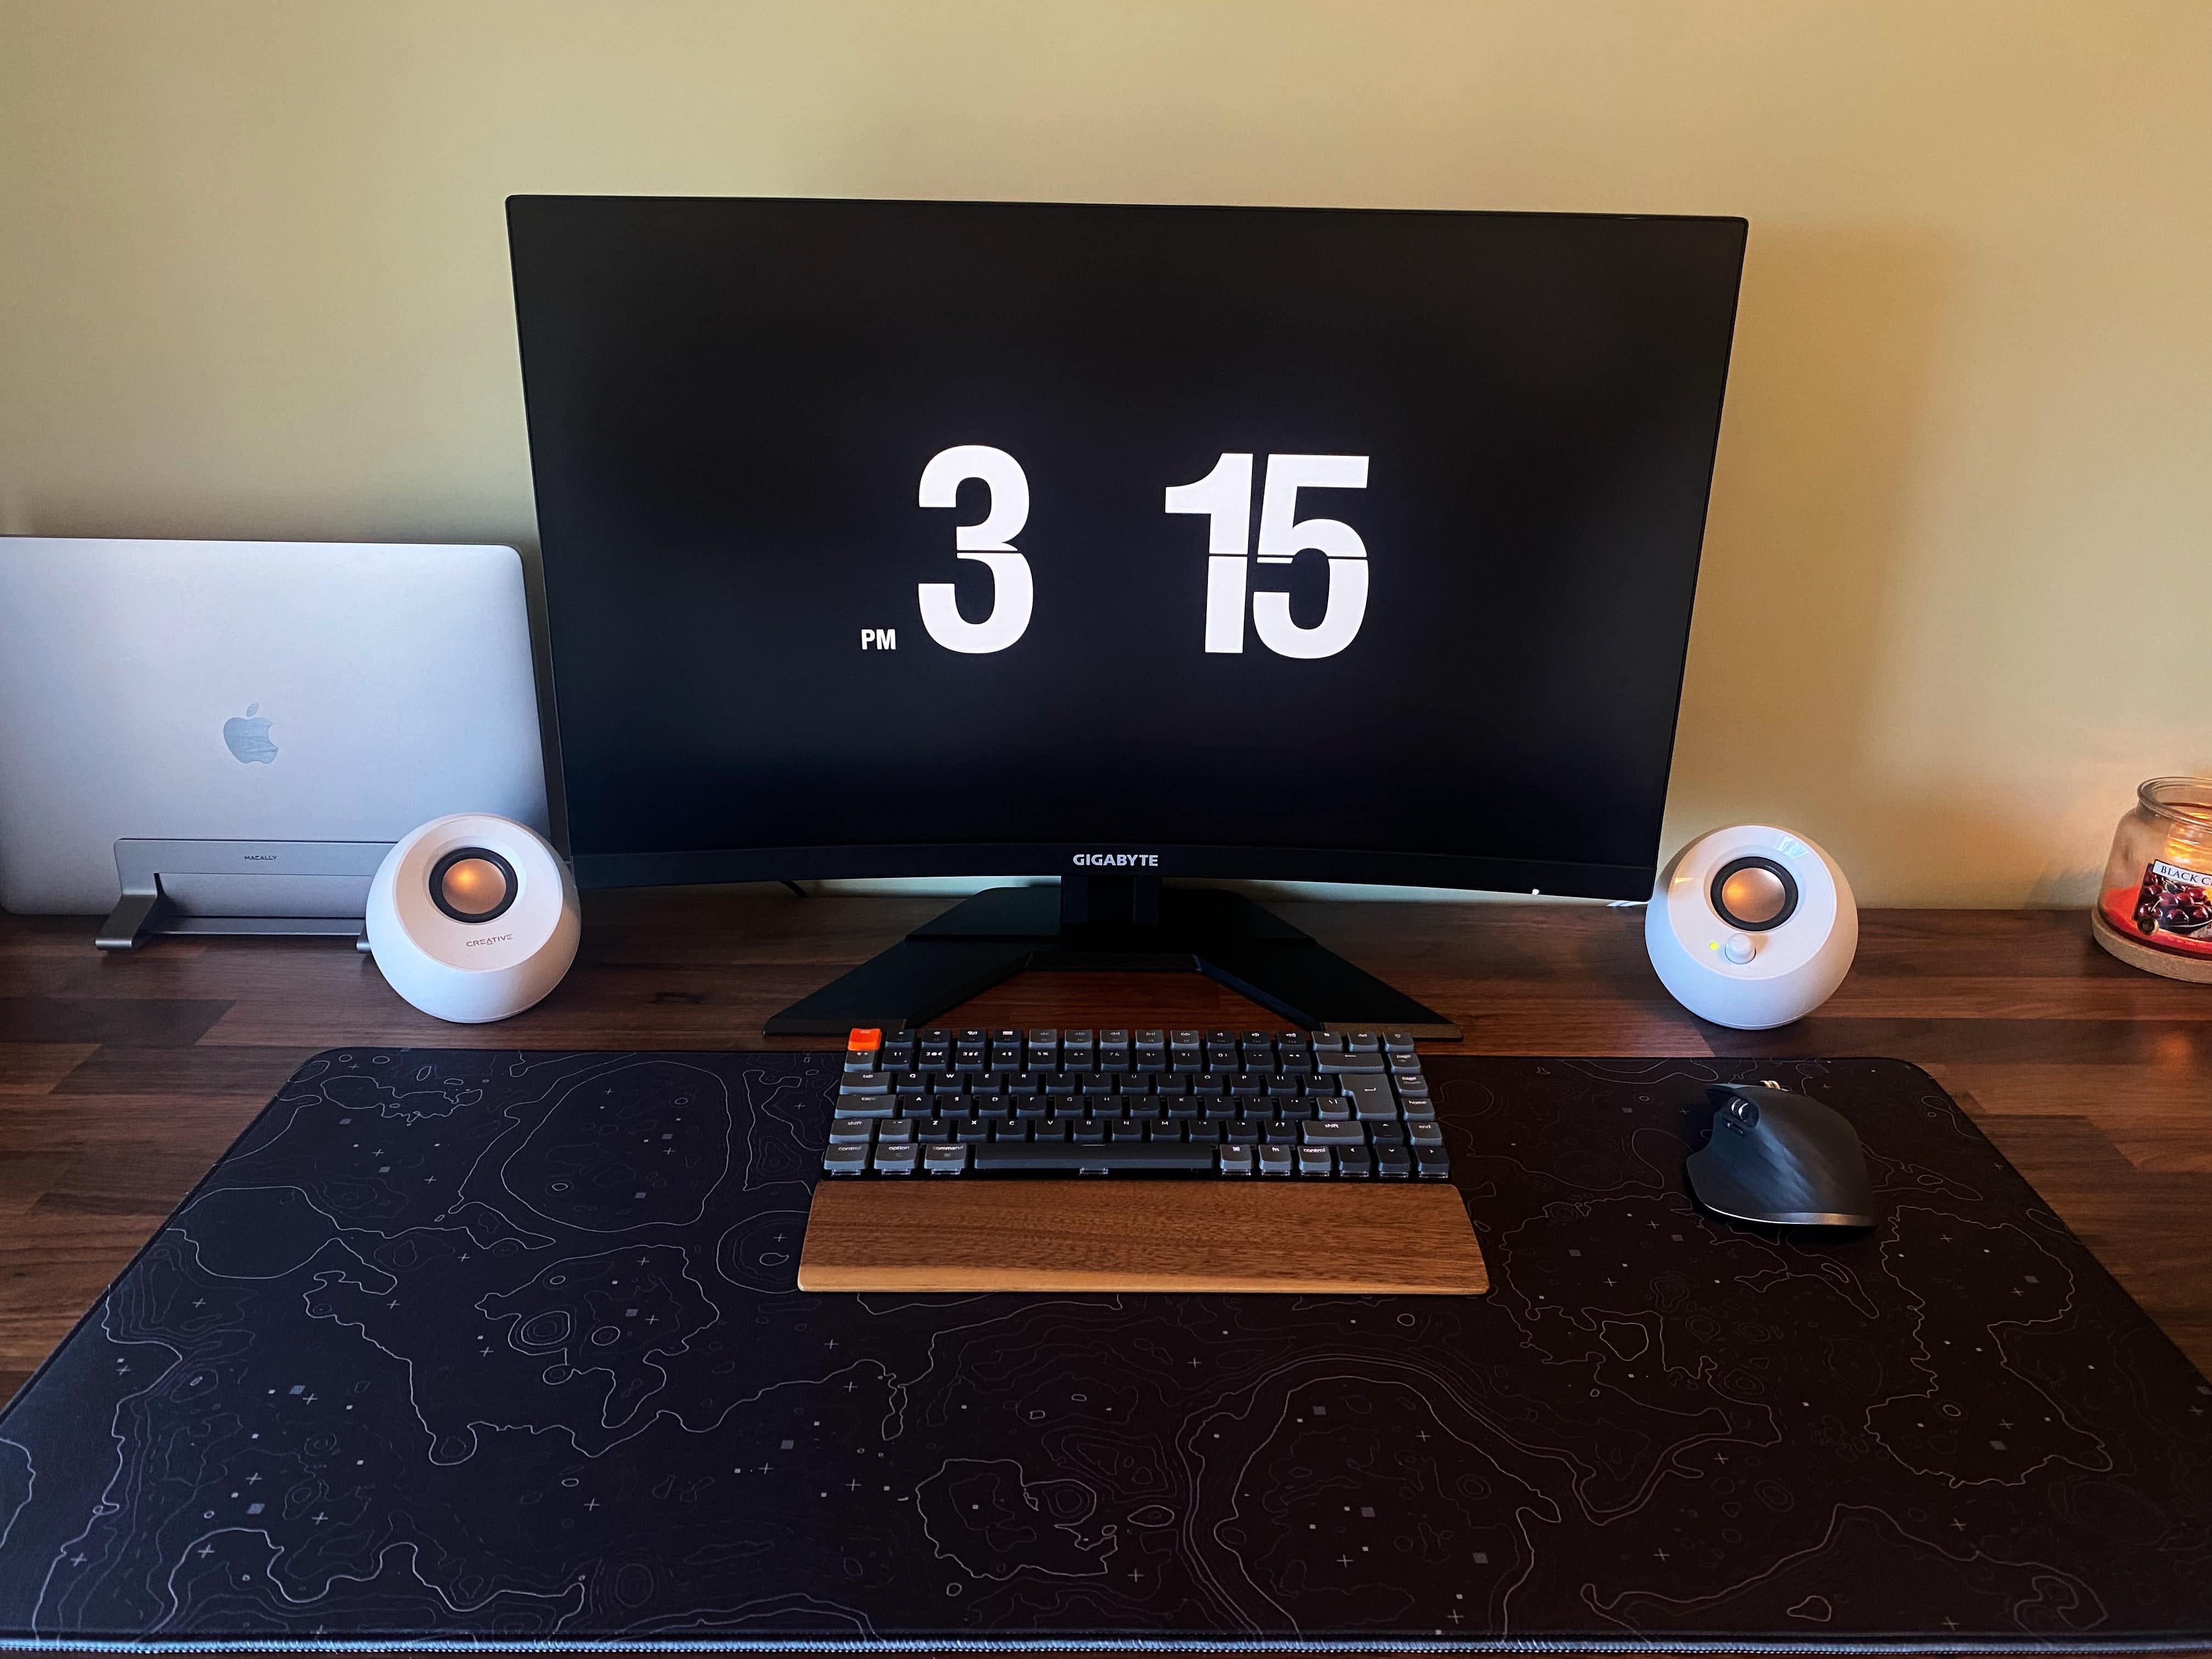 The Creative Pebble speakers on either side of the curved monitor are inexpensive. Maybe too much so. 